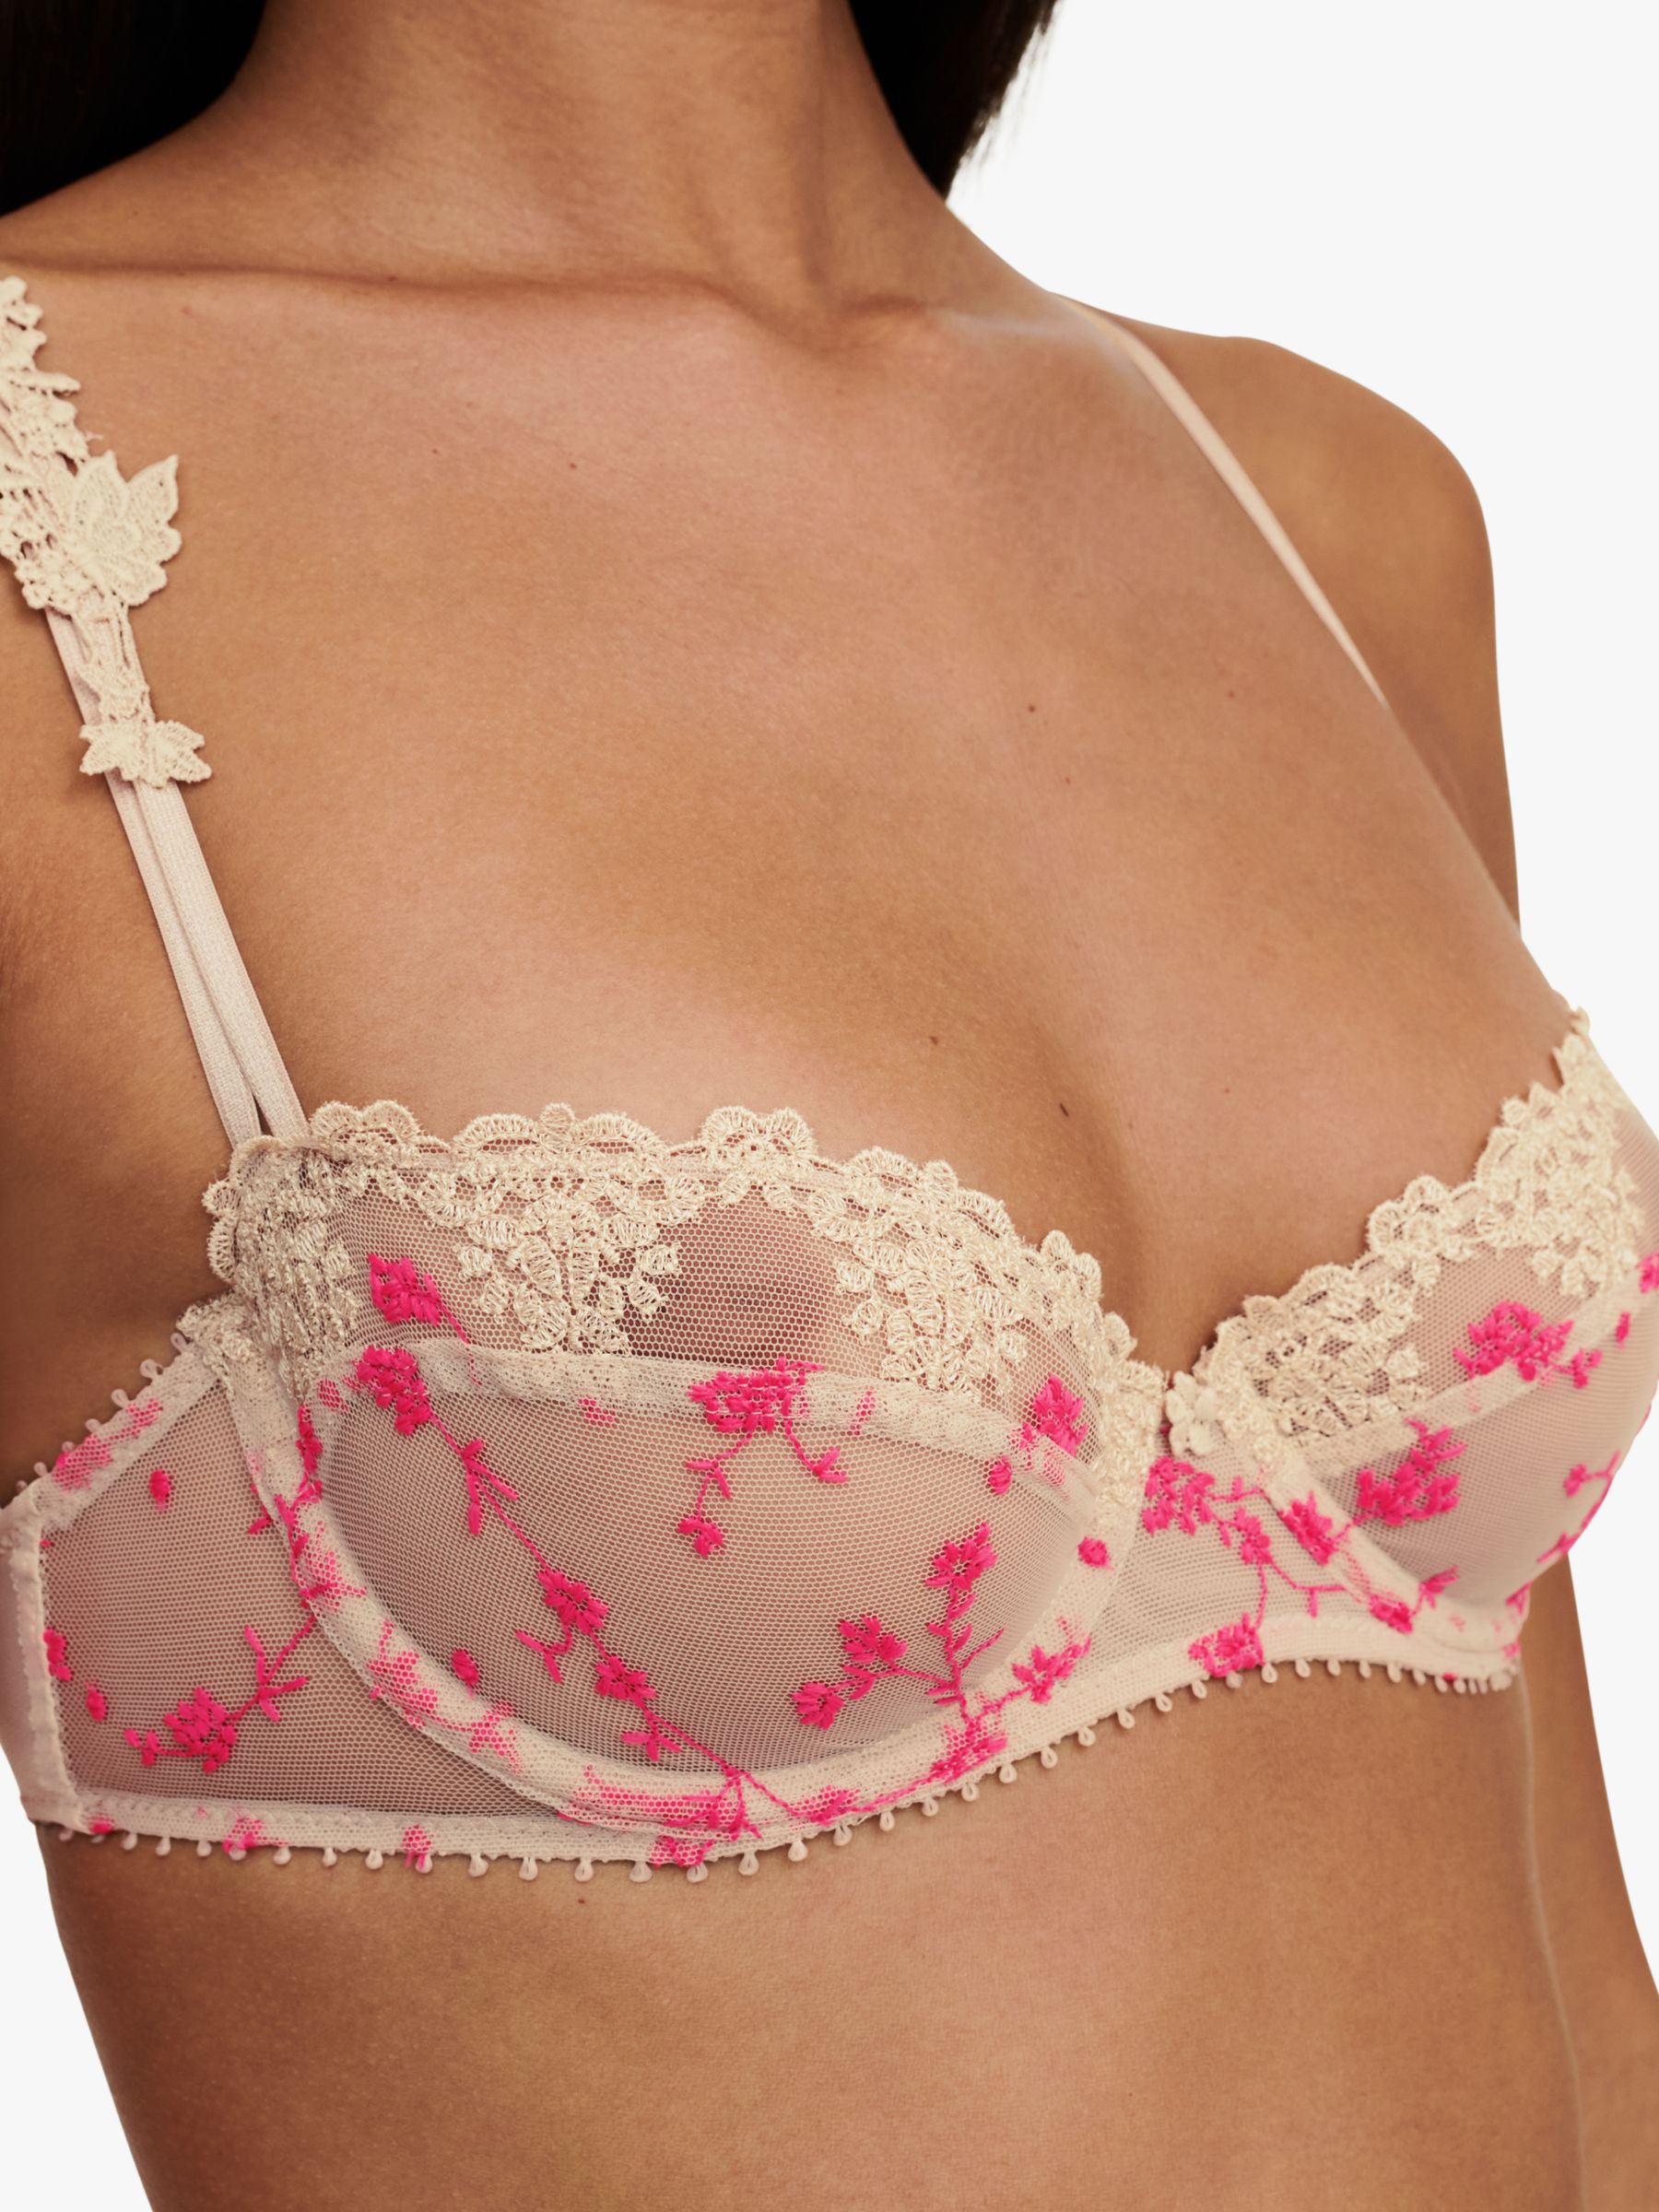 Passionata White Nights Lace-embellished Stretch-lace Balcony Bra in Pink